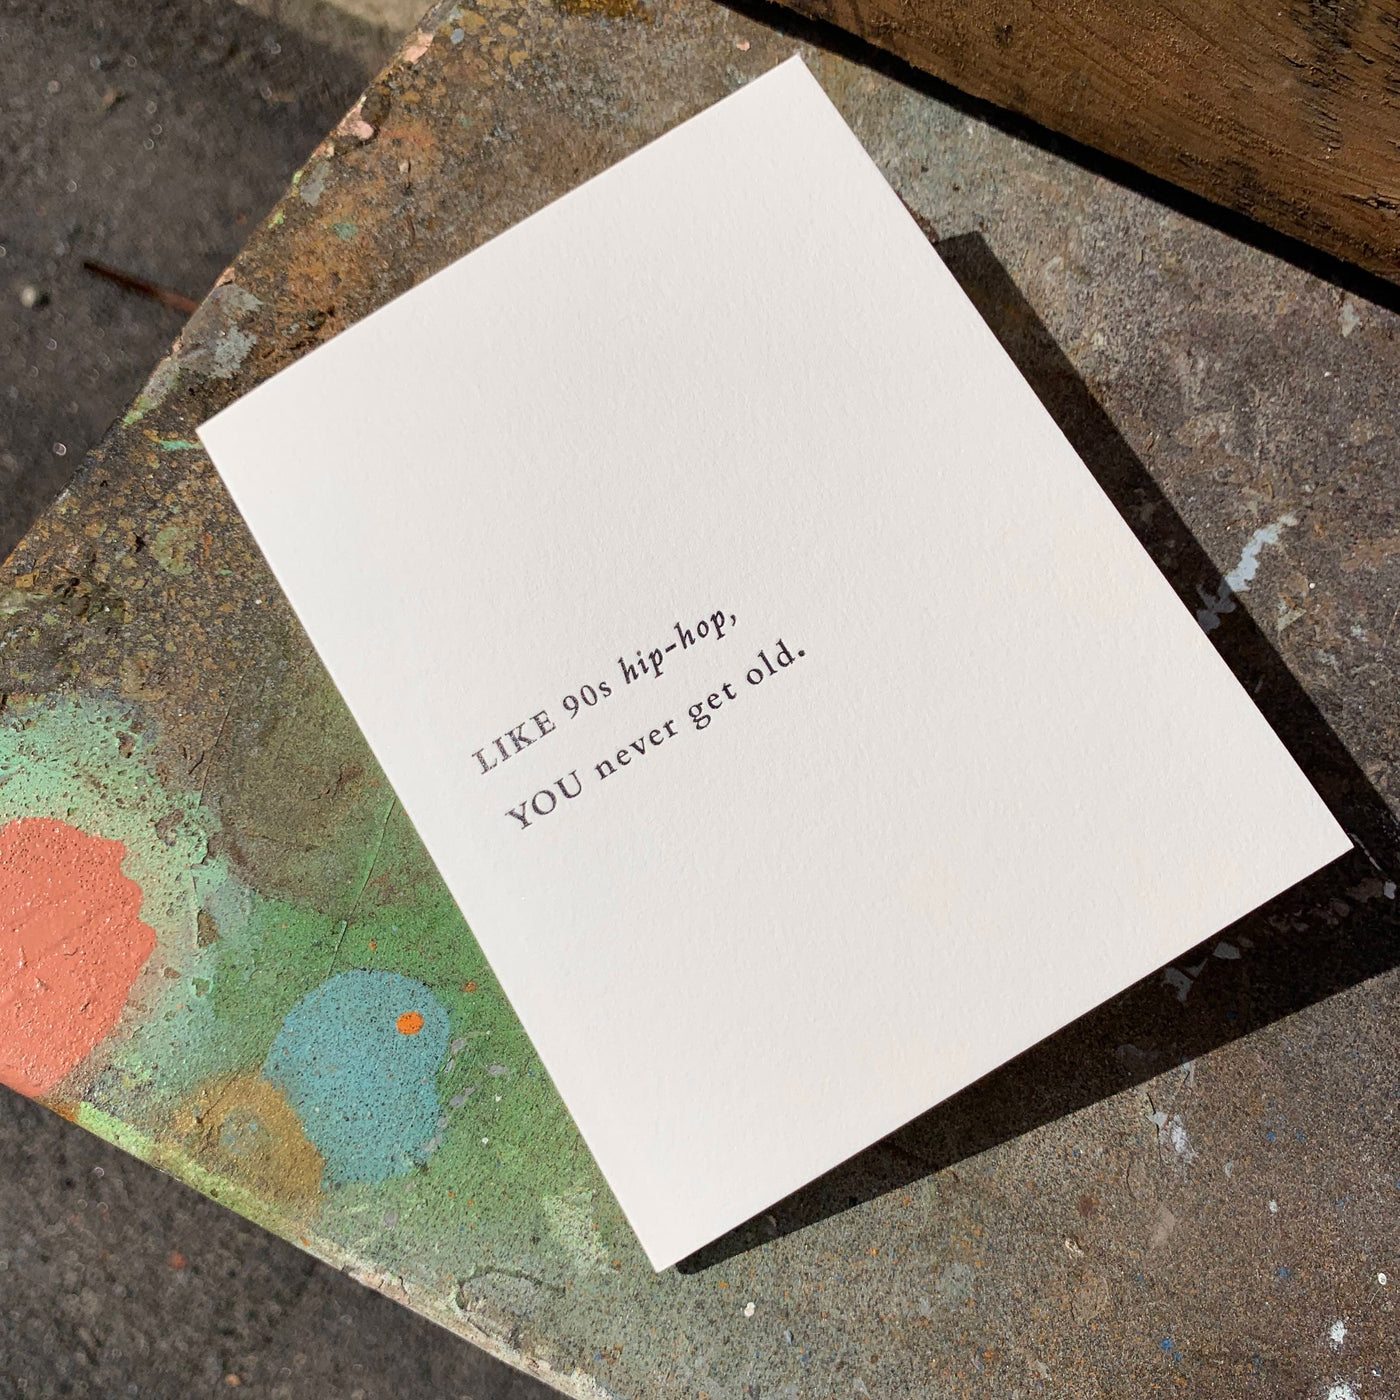 Greeting card on rusted table by beknown. Like 90s hip-hop, you never get old.